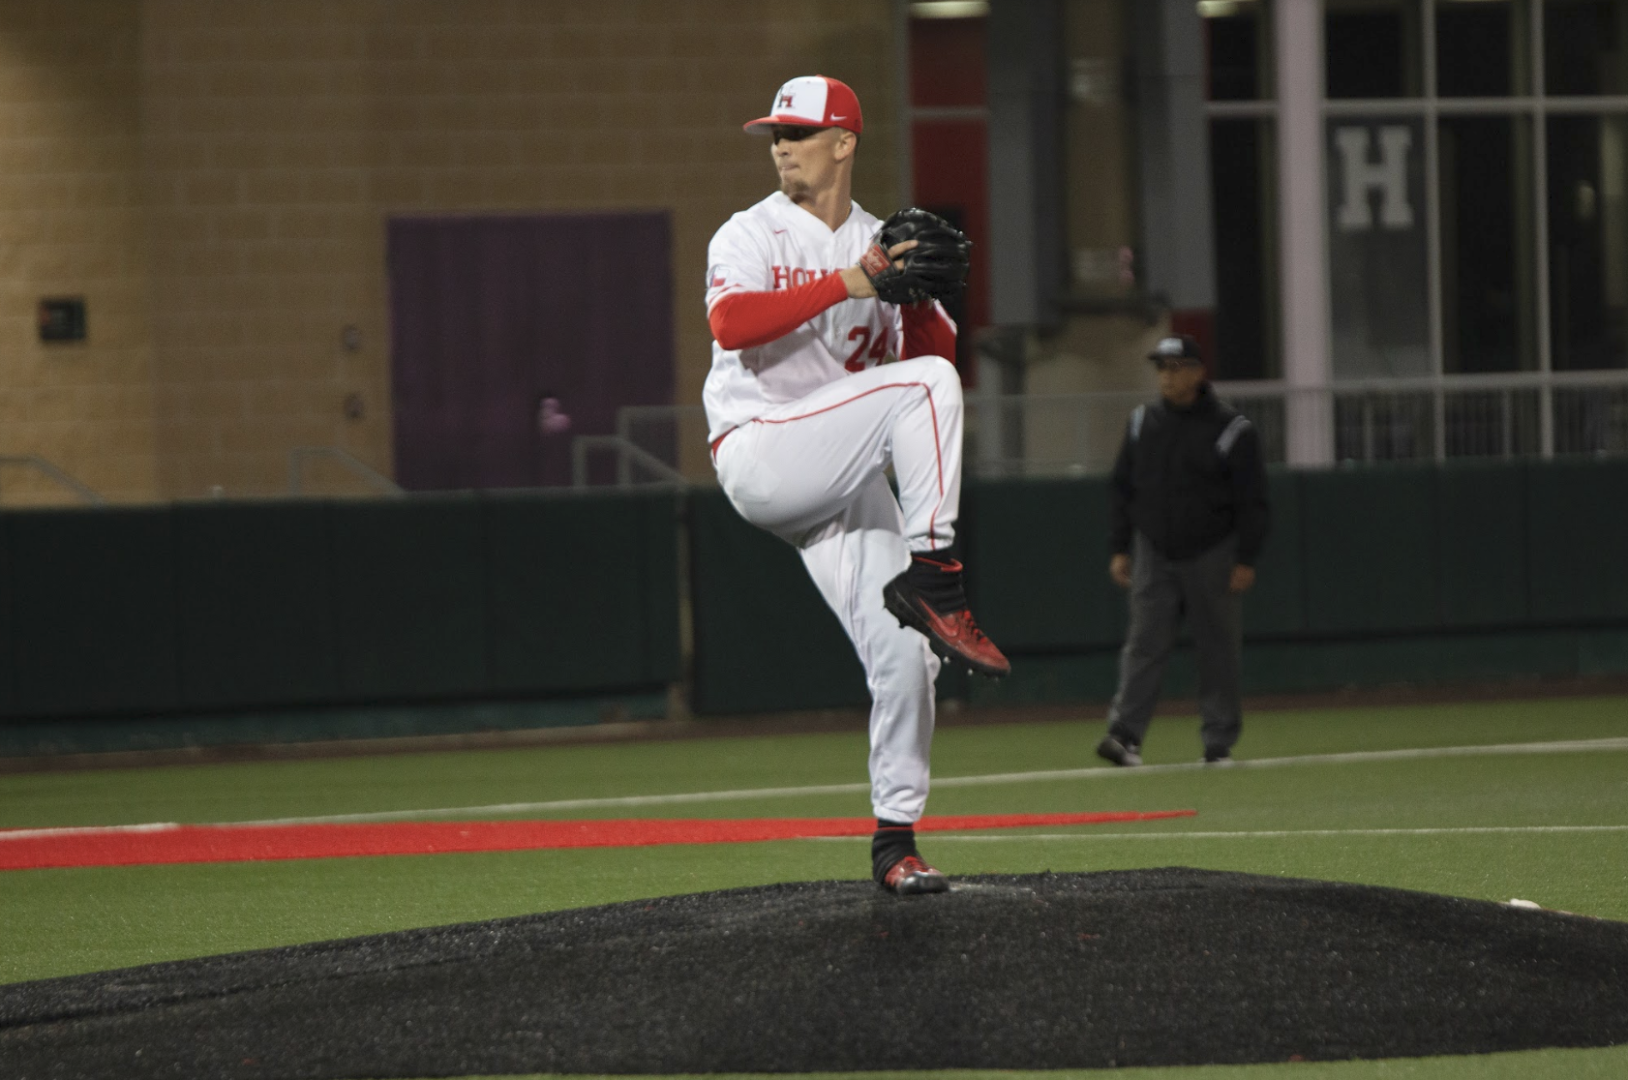 Senior pitcher Lael Lockhart Jr. gave up six runs, three earned, over 4.0 innings pitched in Houston's loss to Texas State on Friday night at Schroeder Park. | Sydney Rose/The Cougar